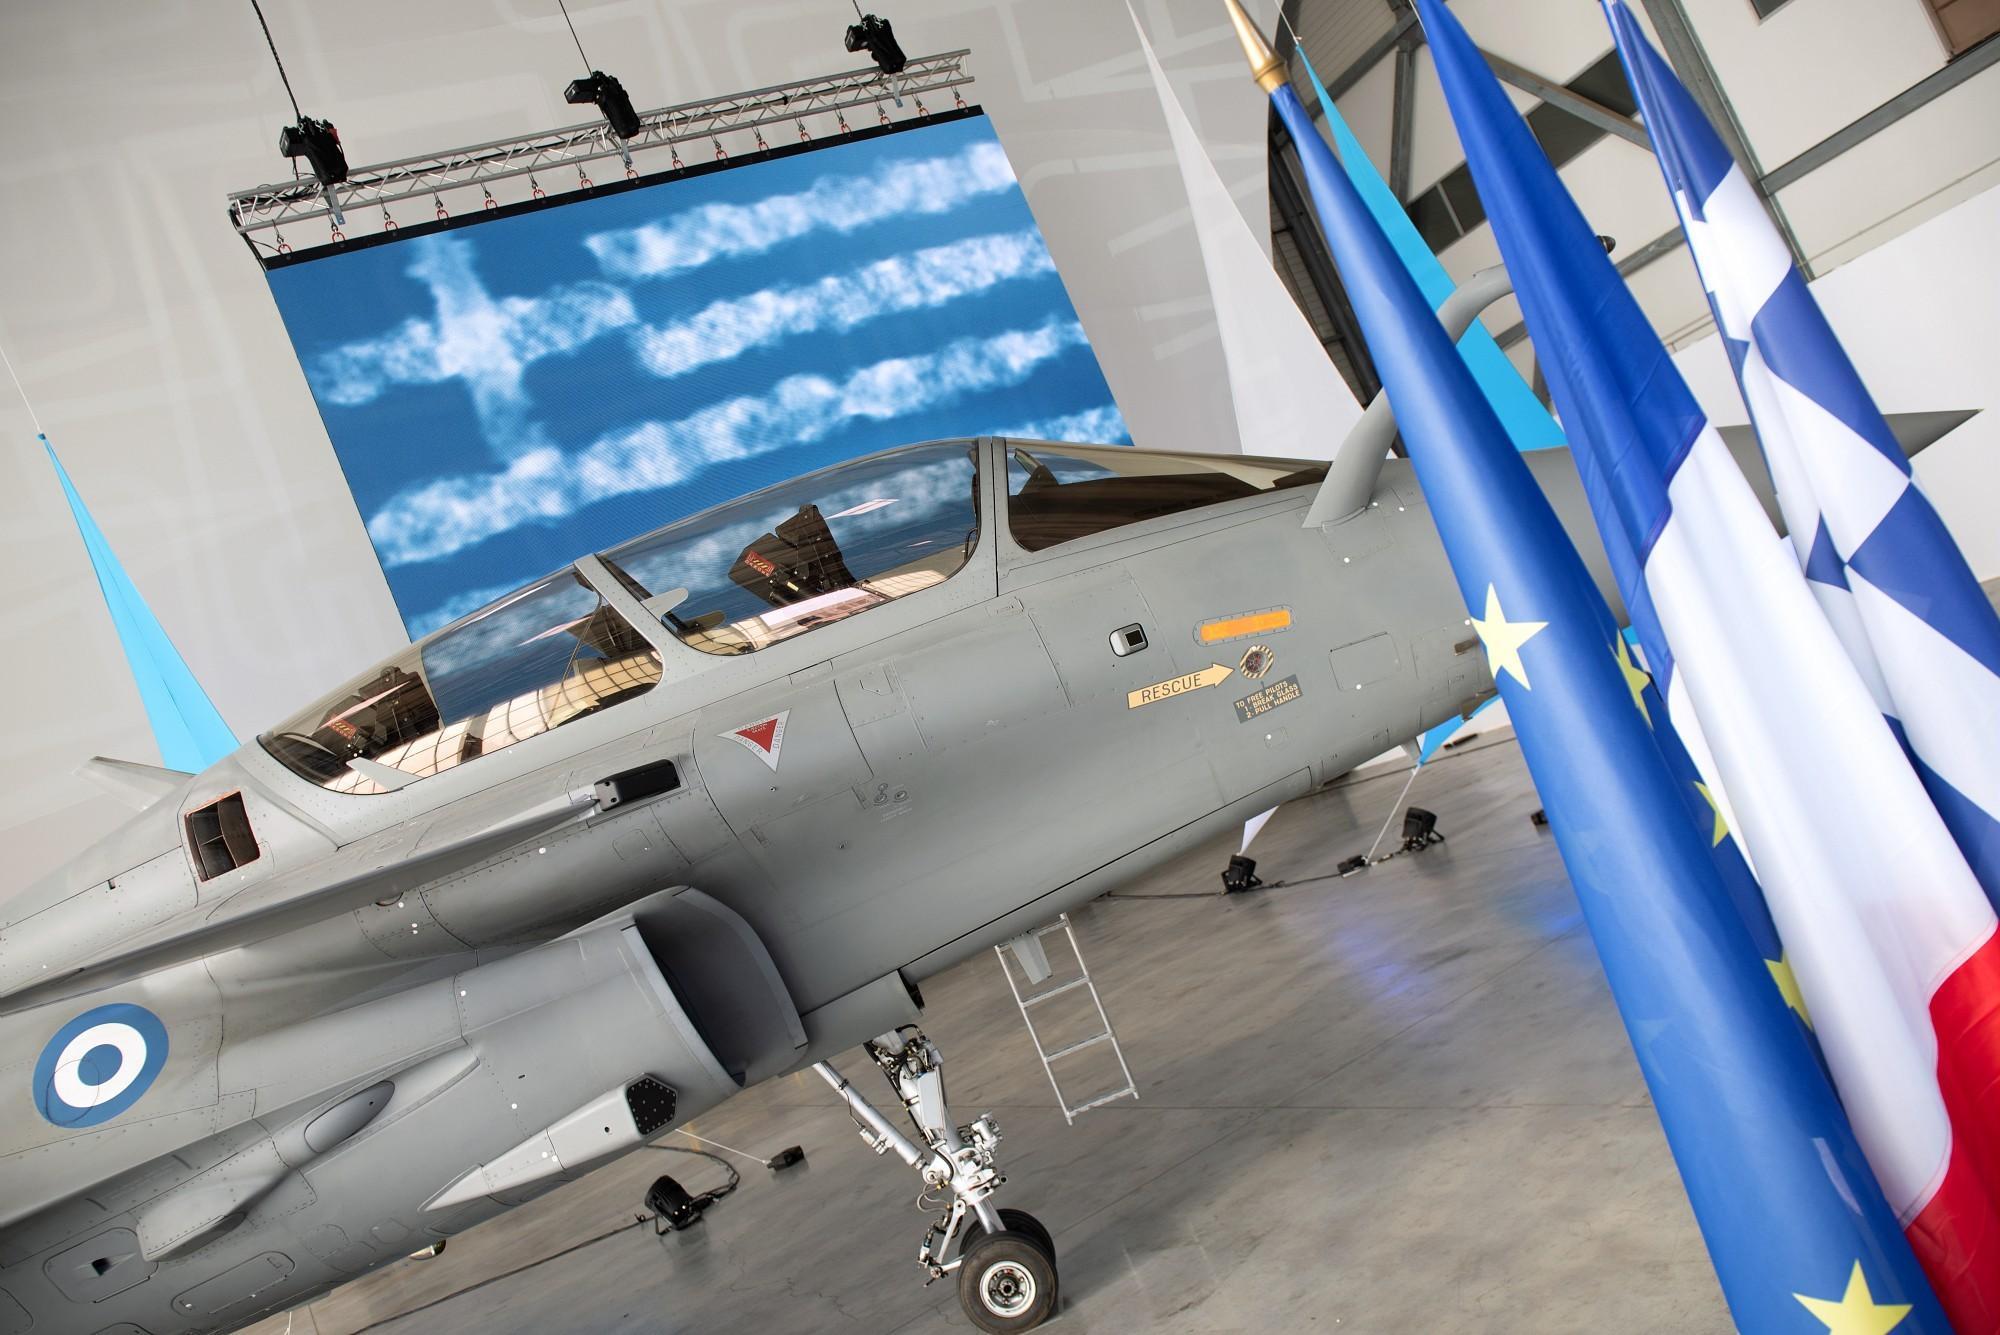 The Hellenic Air Force (HAF) has taken delivery of its first Dassault Aviation Rafale fighter jet at the airframer's Flight Test Center in Istres